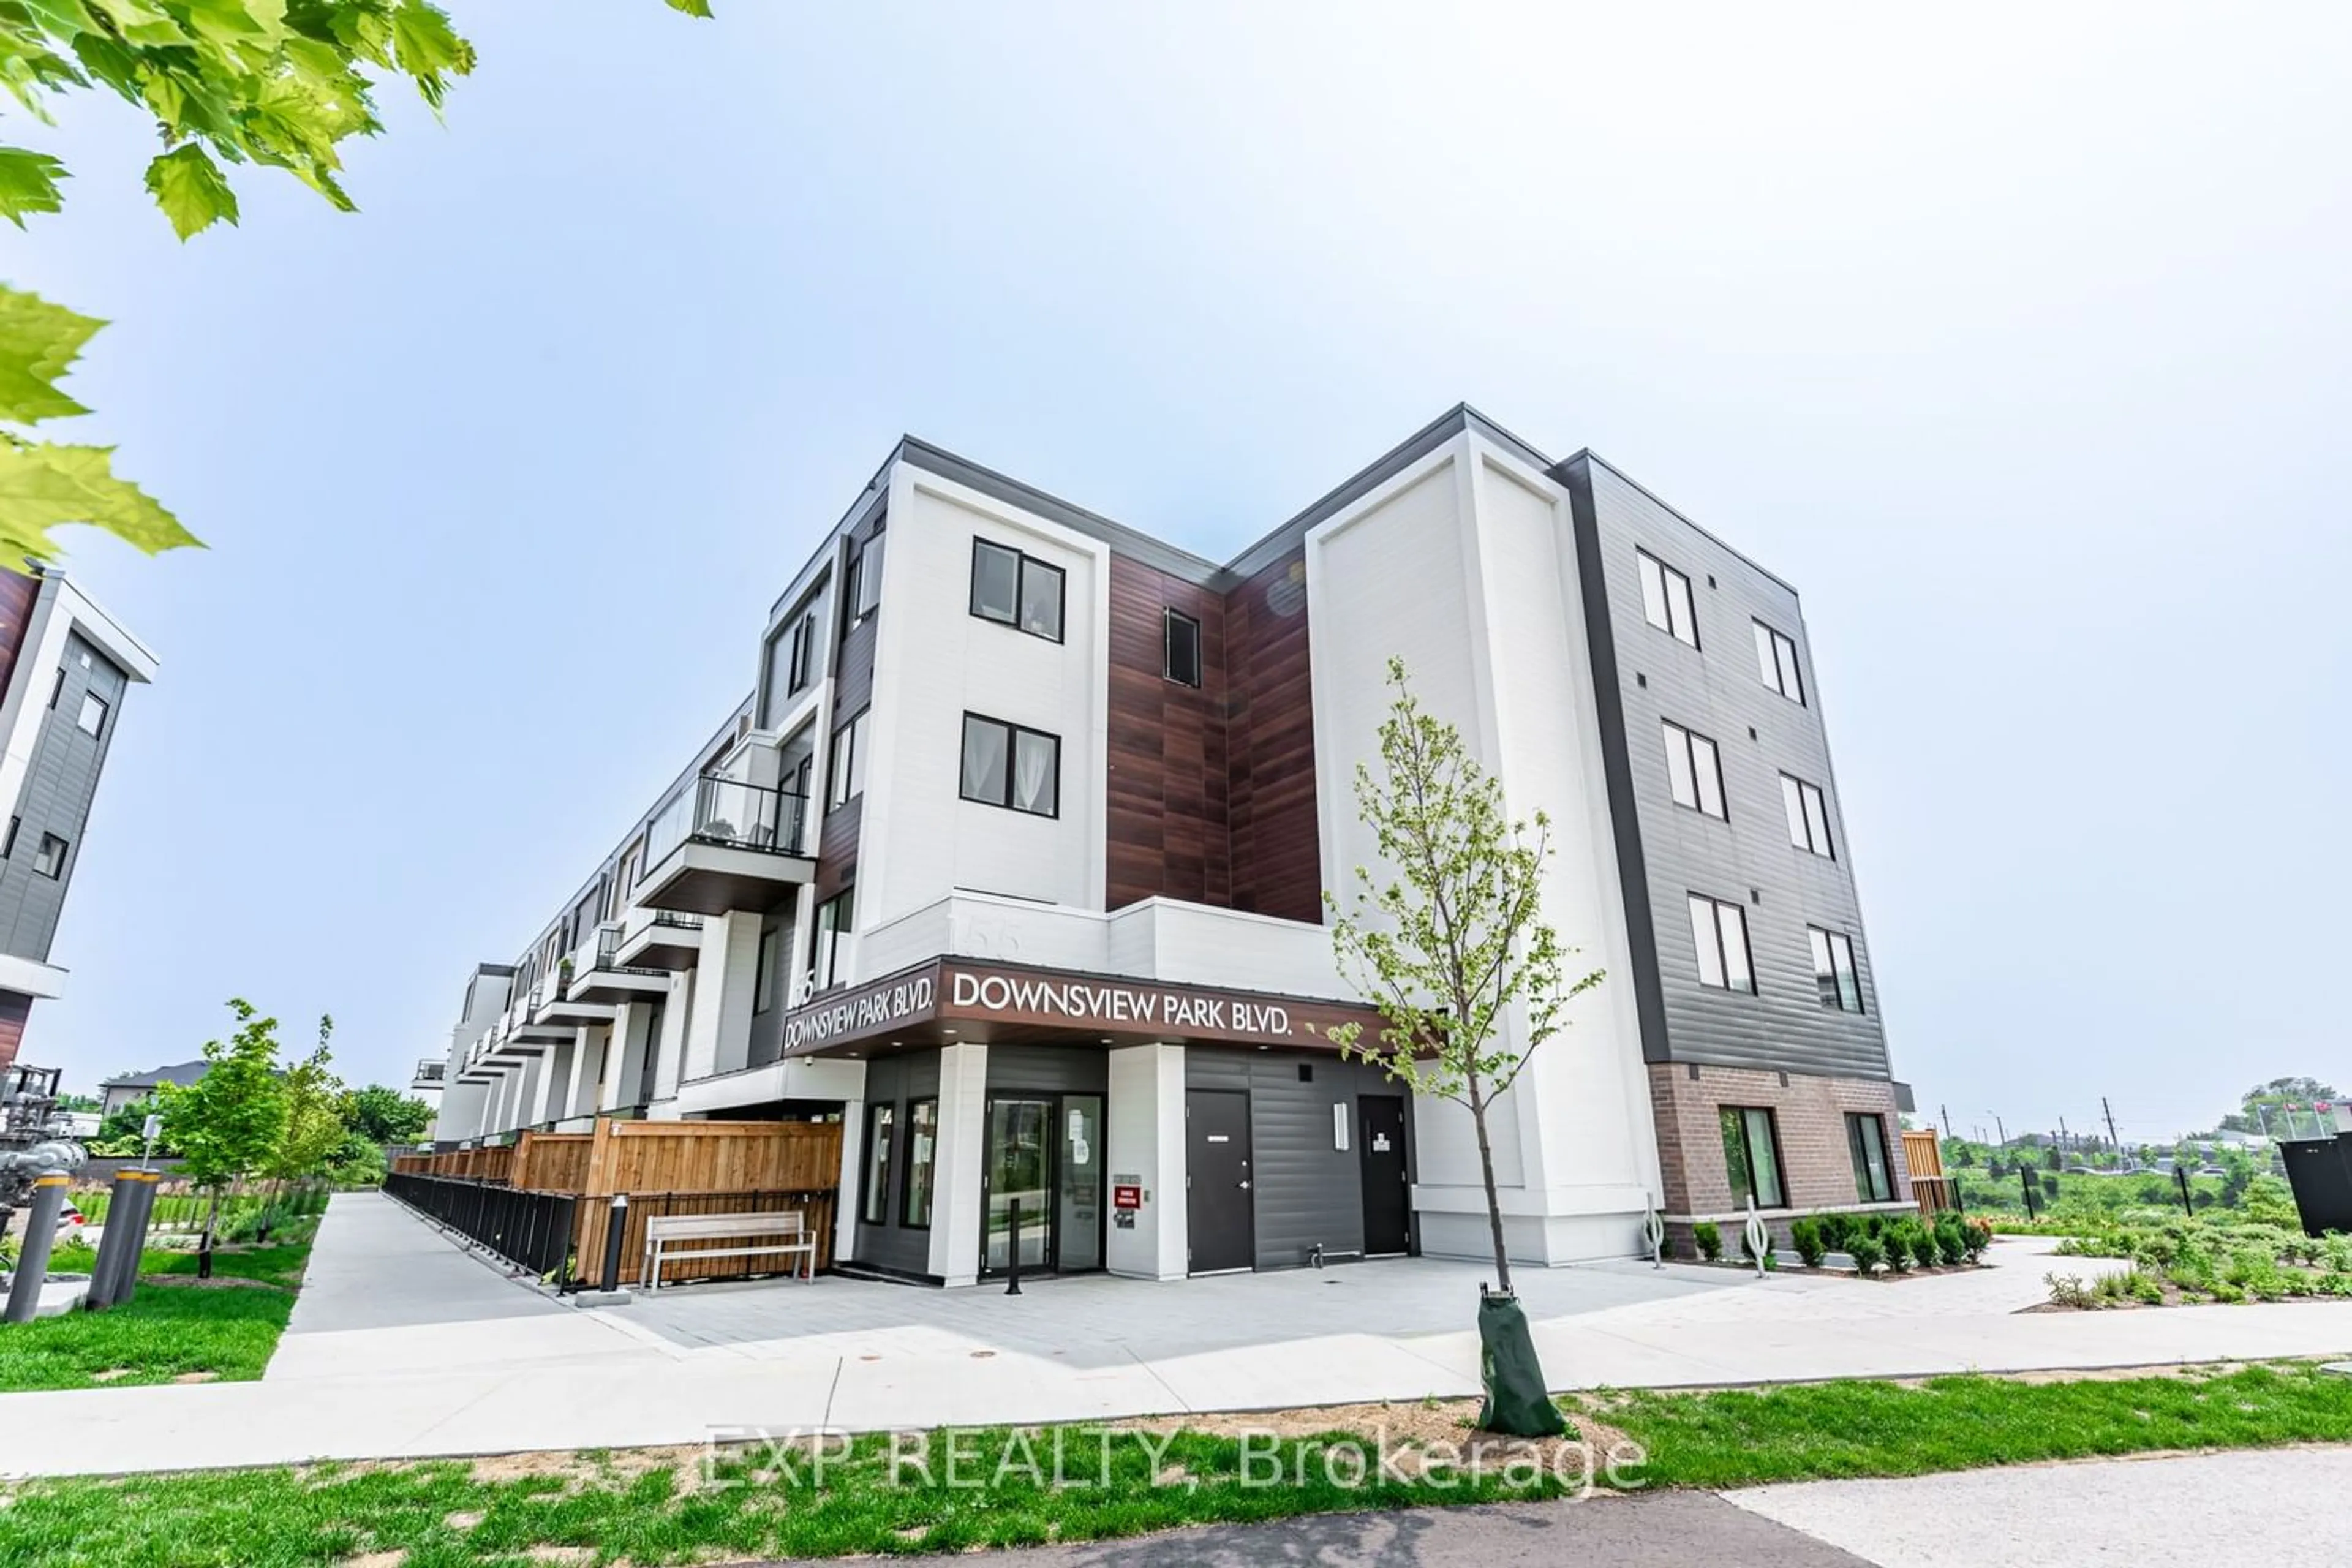 A pic from exterior of the house or condo for 155 Downsview Park Blvd #215, Toronto Ontario M3K 0E3